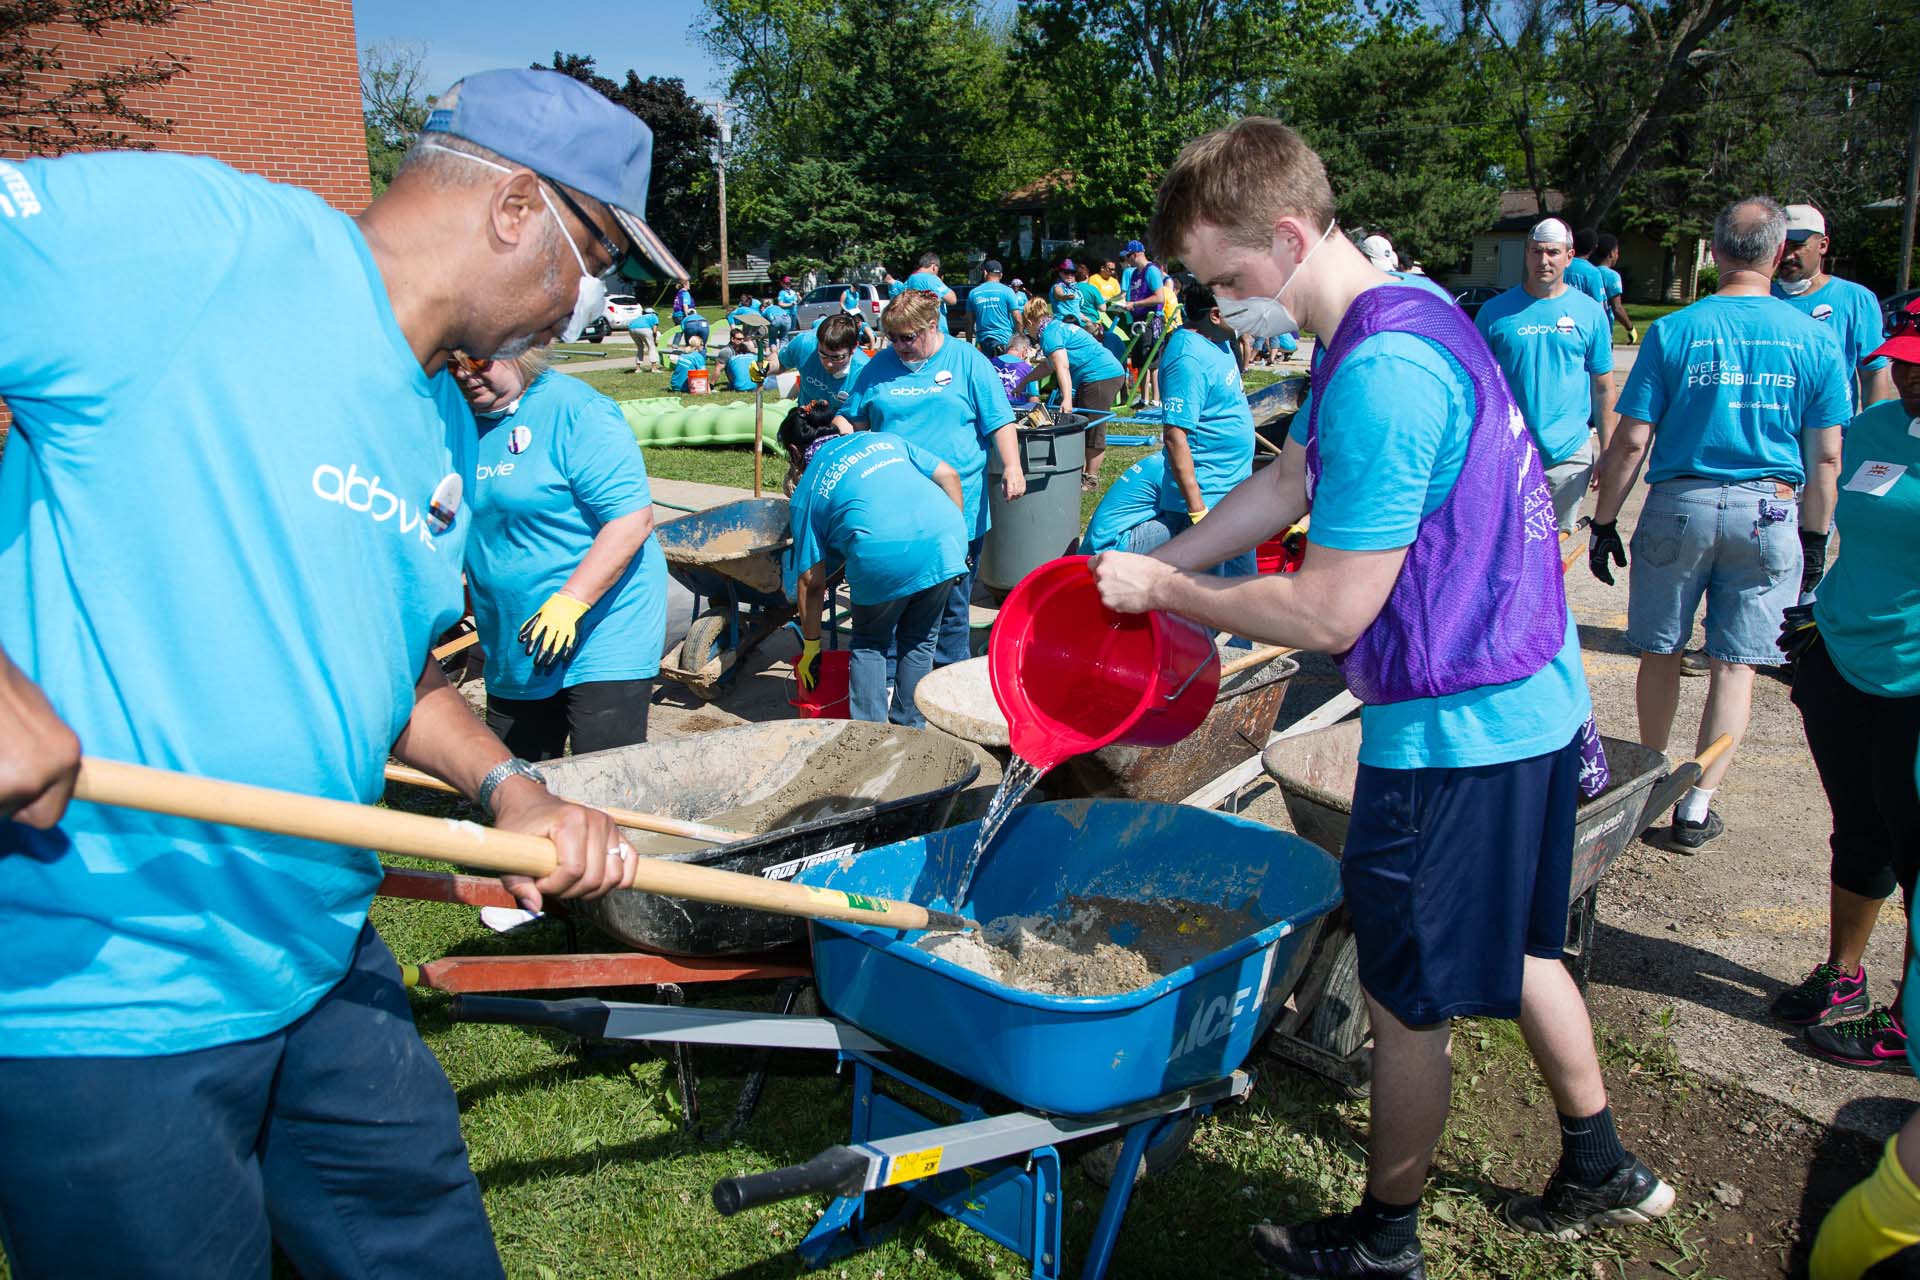 AbbVie volunteers will revitalize schools, libraries, community centers and more.